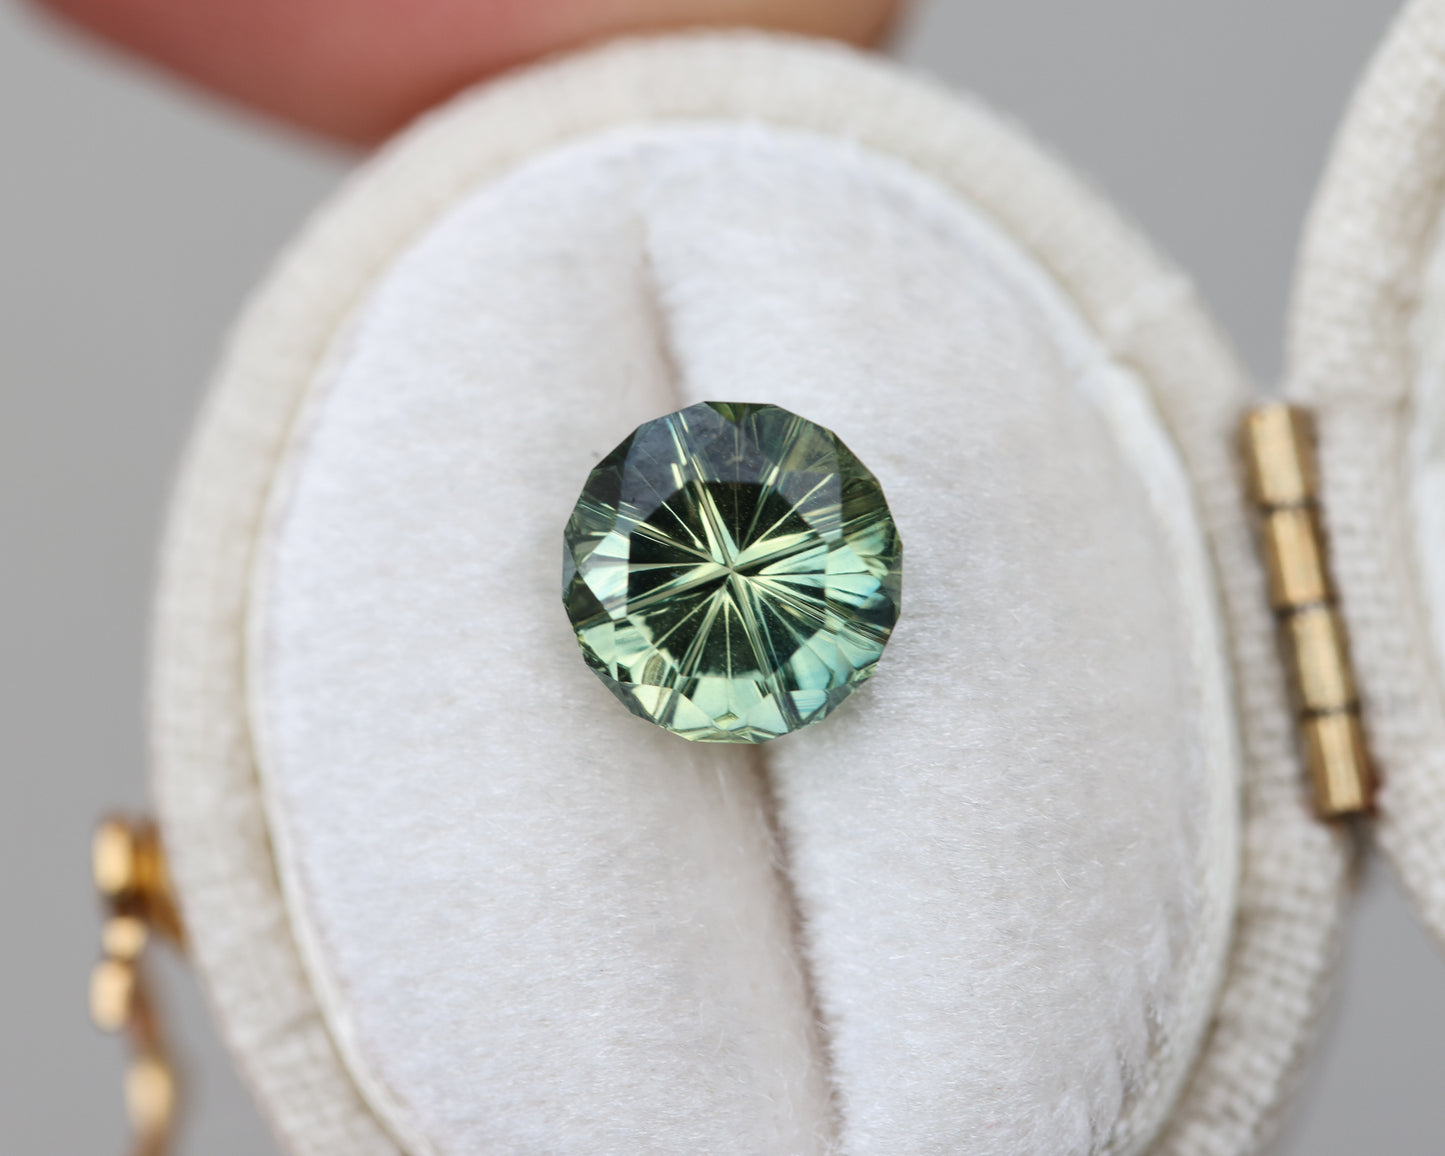 ON HOLD - 2.35ct round green teal sapphire - Starbrite cut by John Dyer